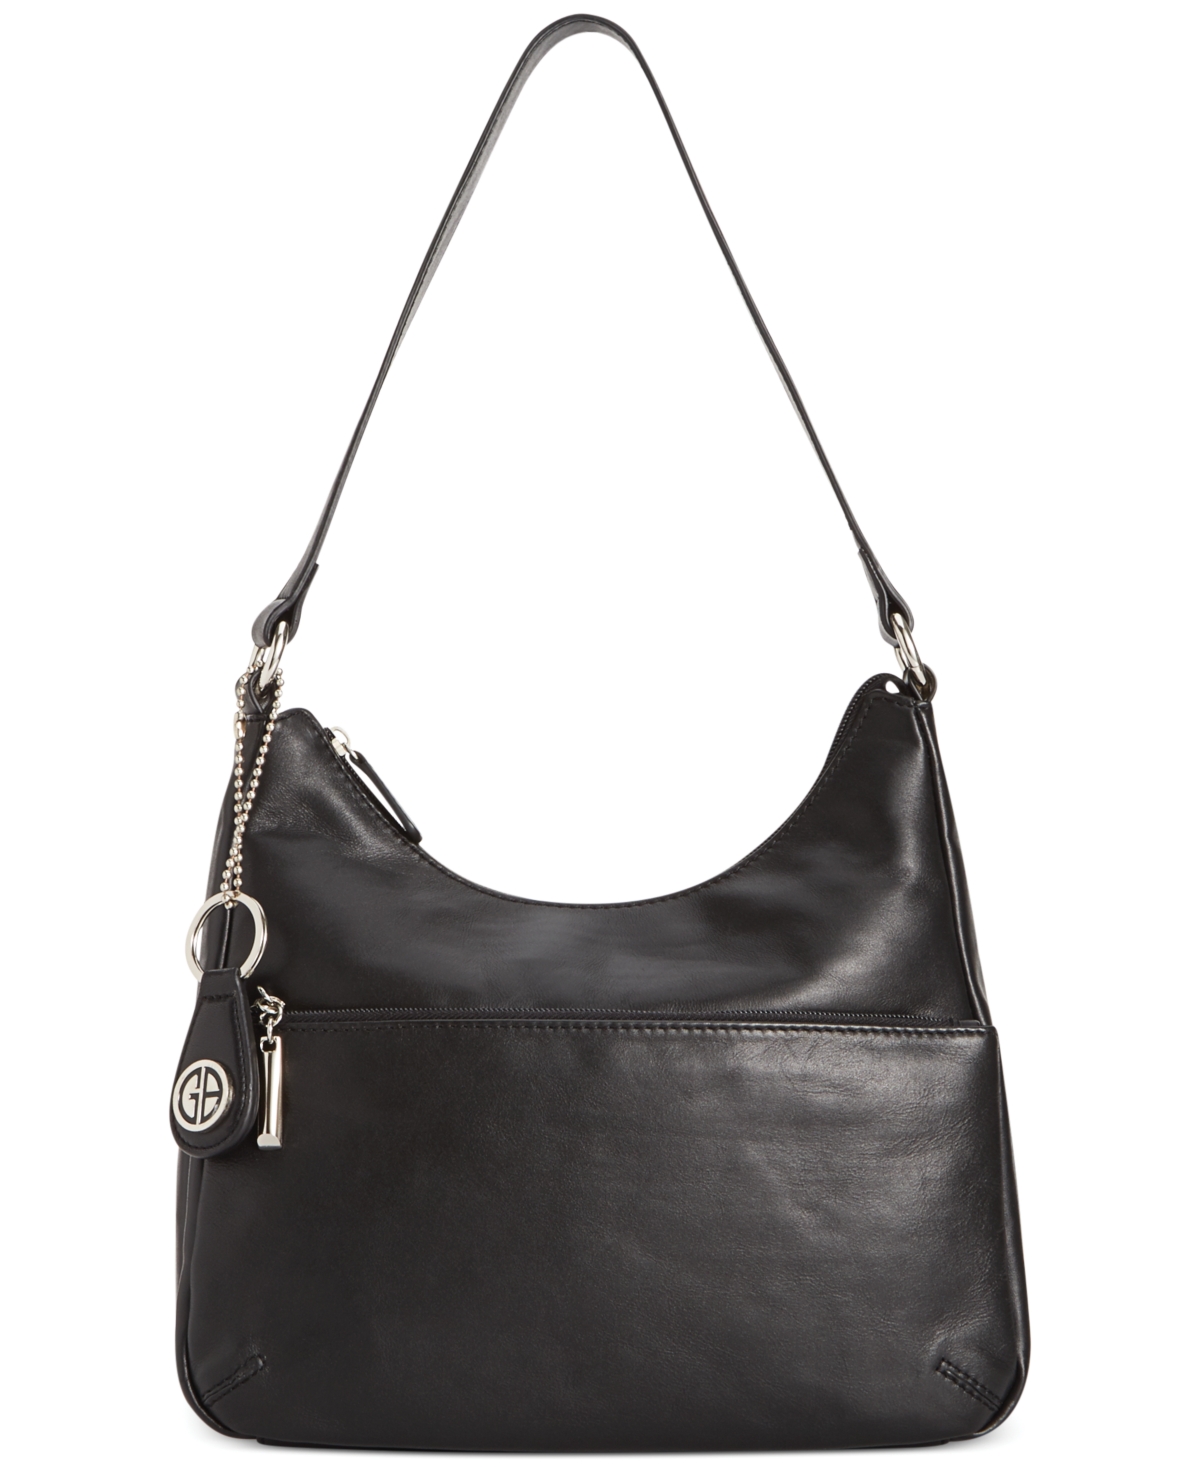 Nappa Leather Hobo Bag, Created for Macy's - Black/Silver